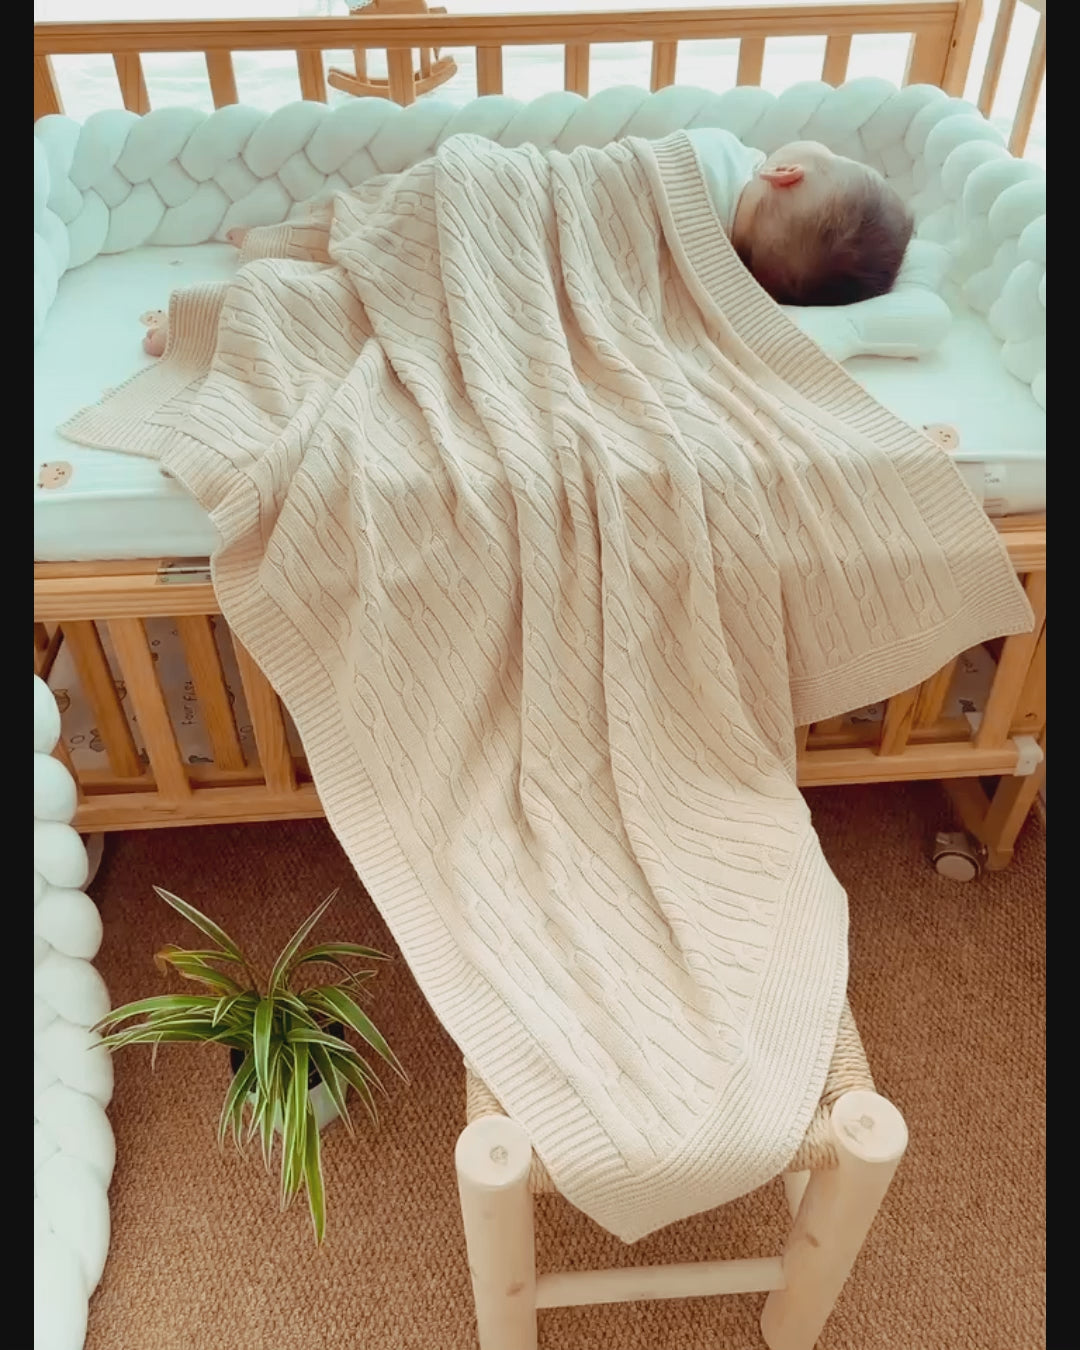 Best Gifts For Newborns: Organic Cotton Baby Cable Knit Blanket - Eotton Canada